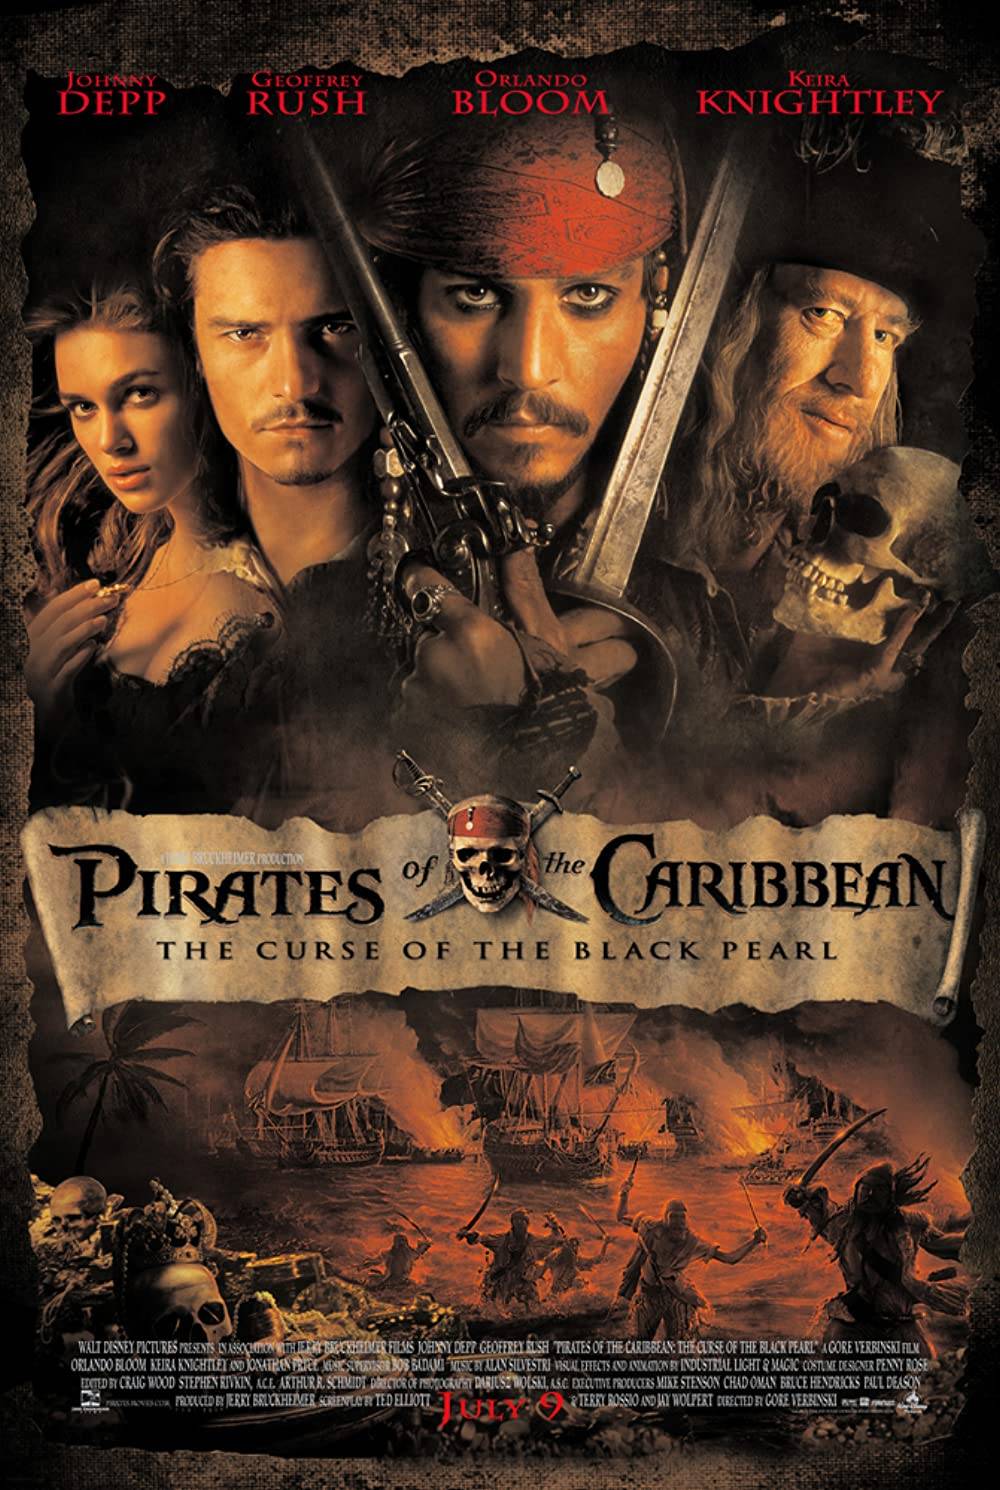 Pirates of the Caribbean movie poster.